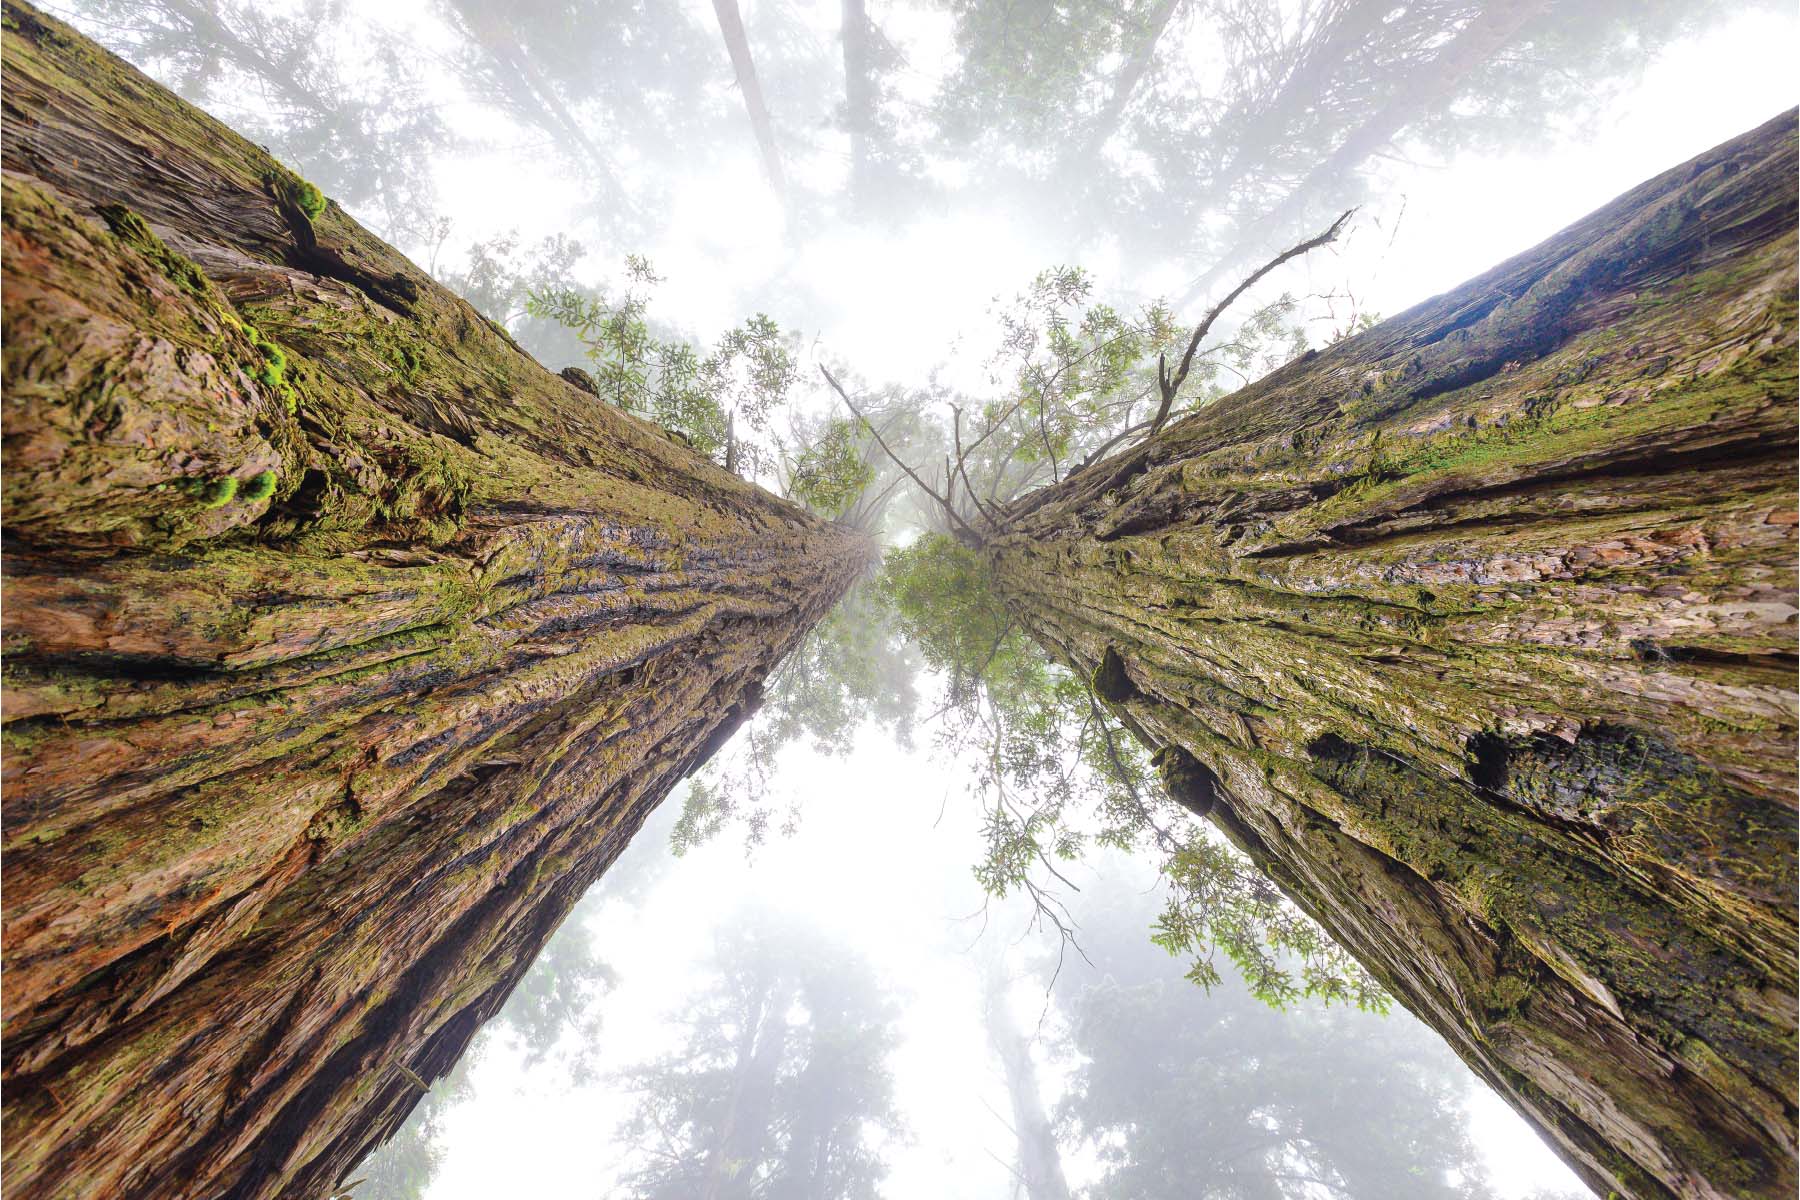 A photo taken by Nick Chill of Giant redwood trees taken from below